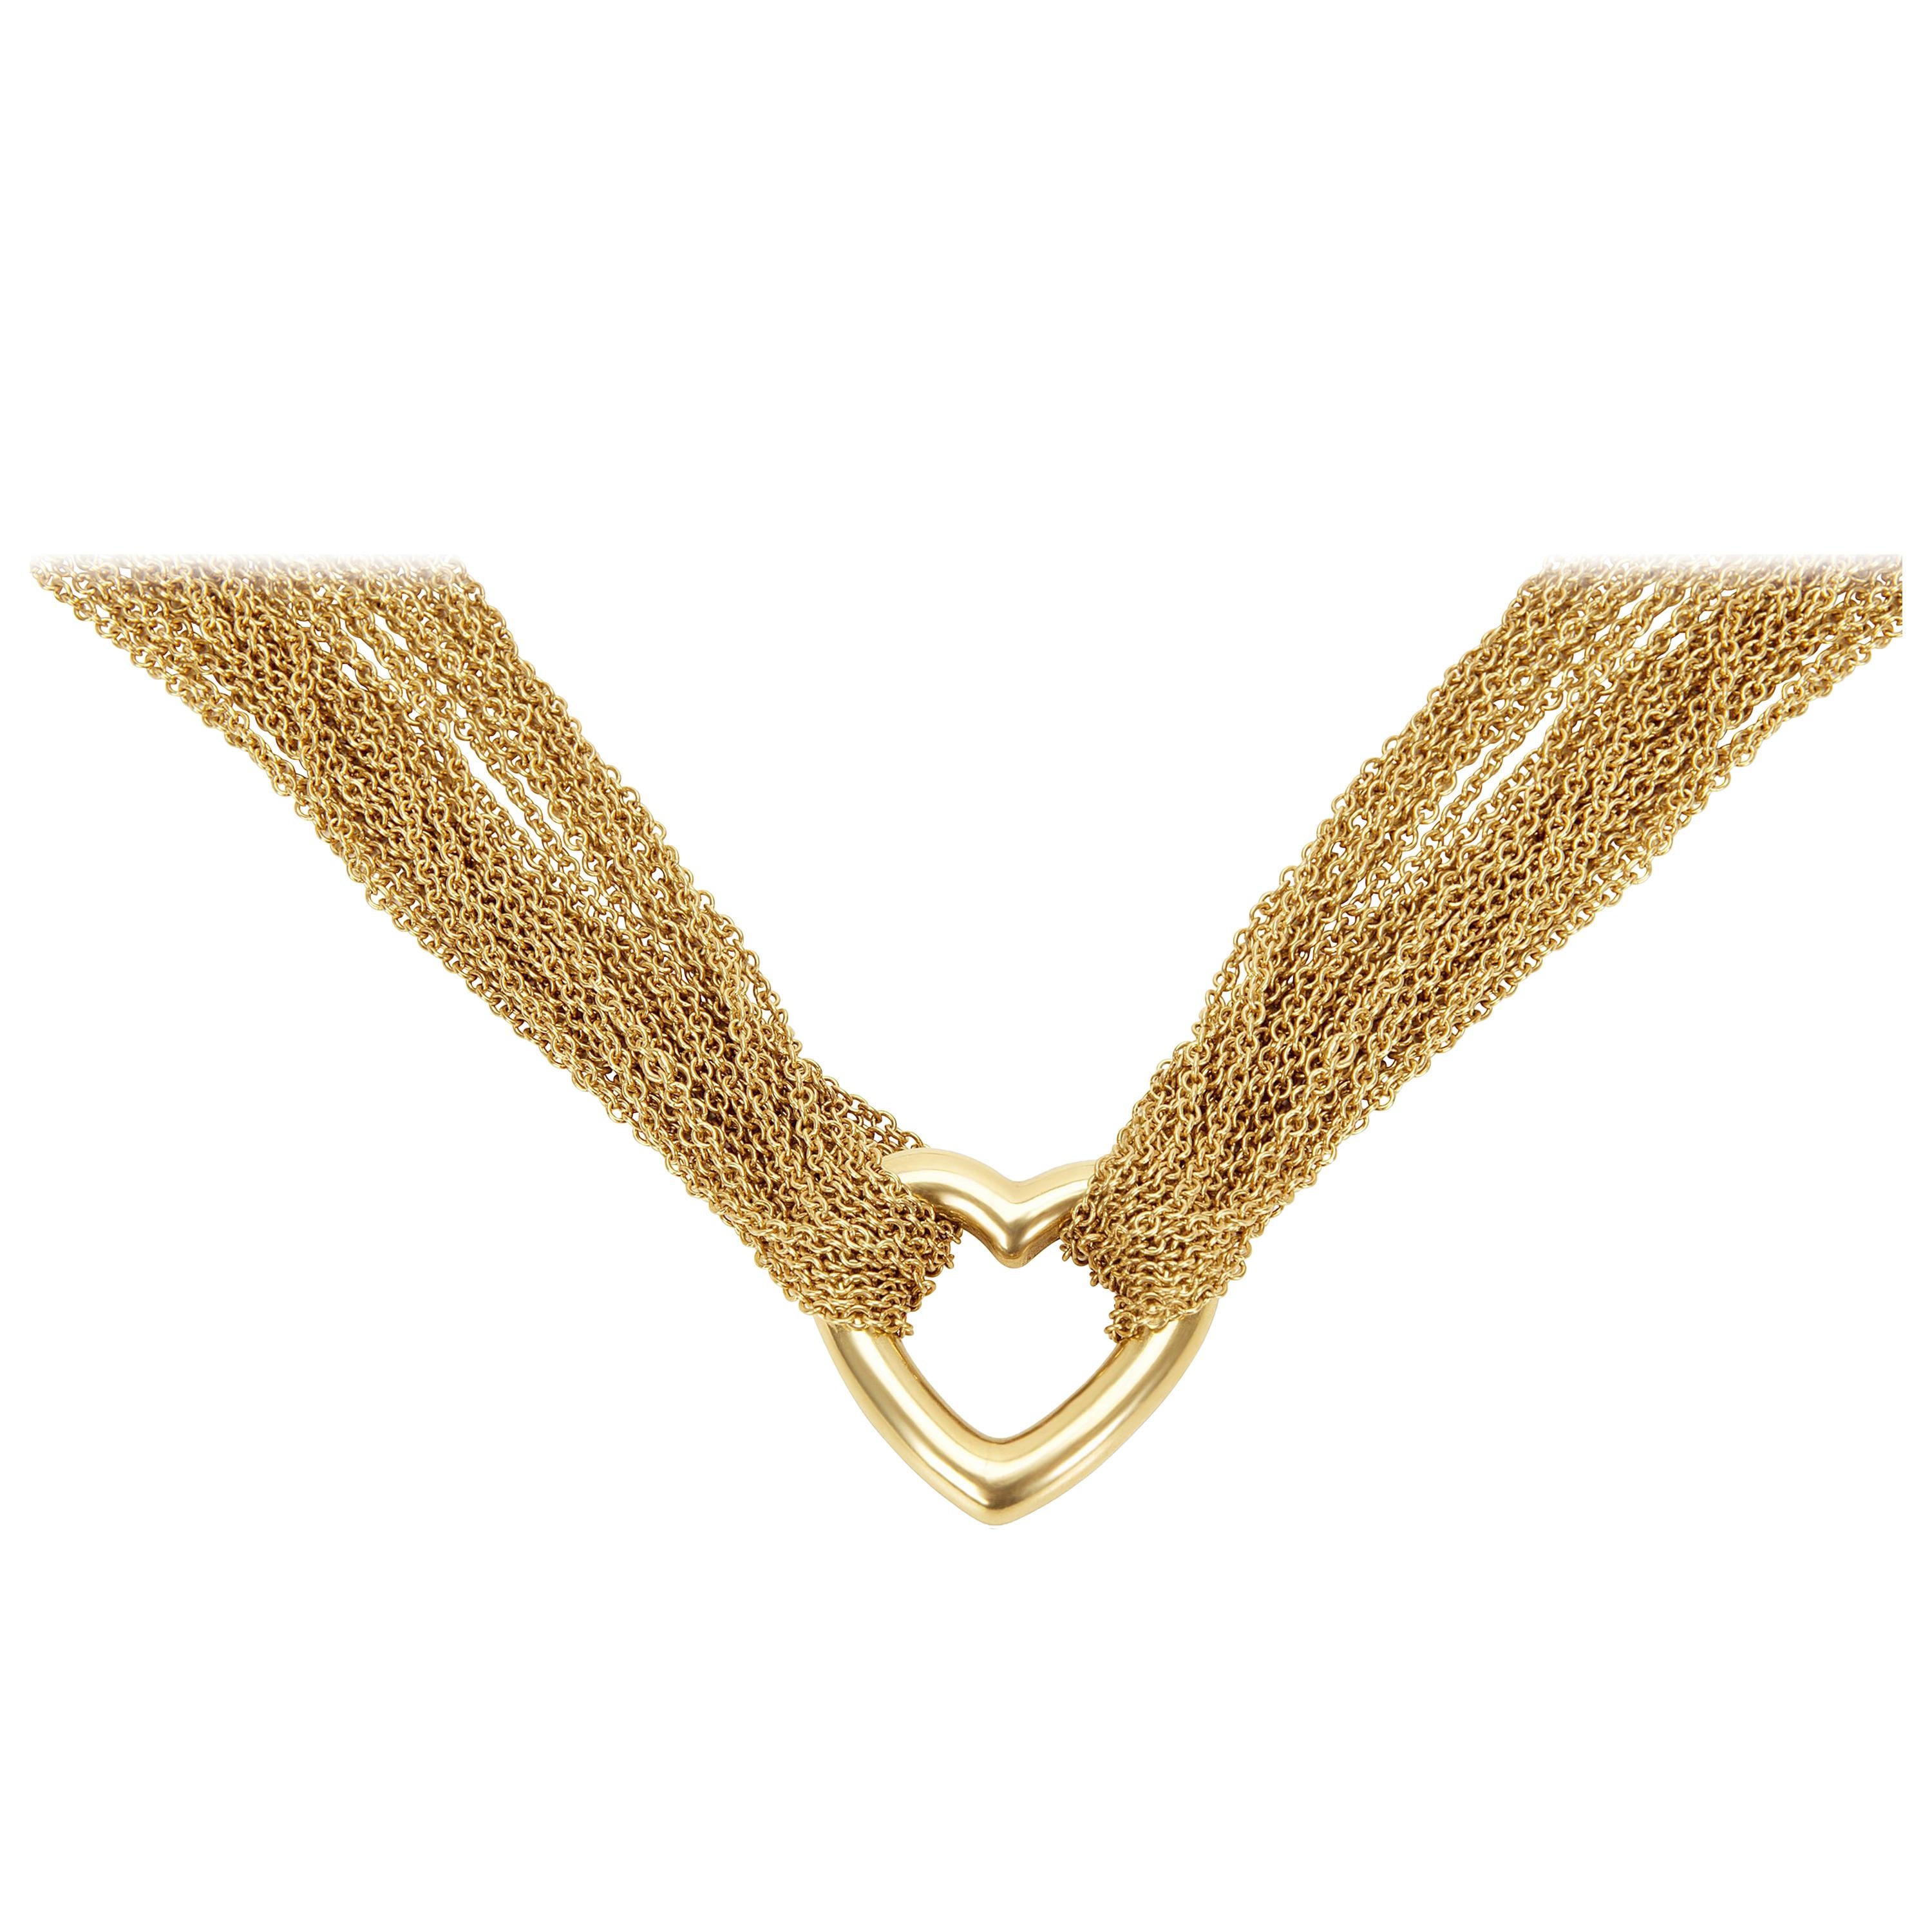 Tiffany & Co. Heart Pendant Mesh Chain Necklace in 18 Karat Yellow Gold